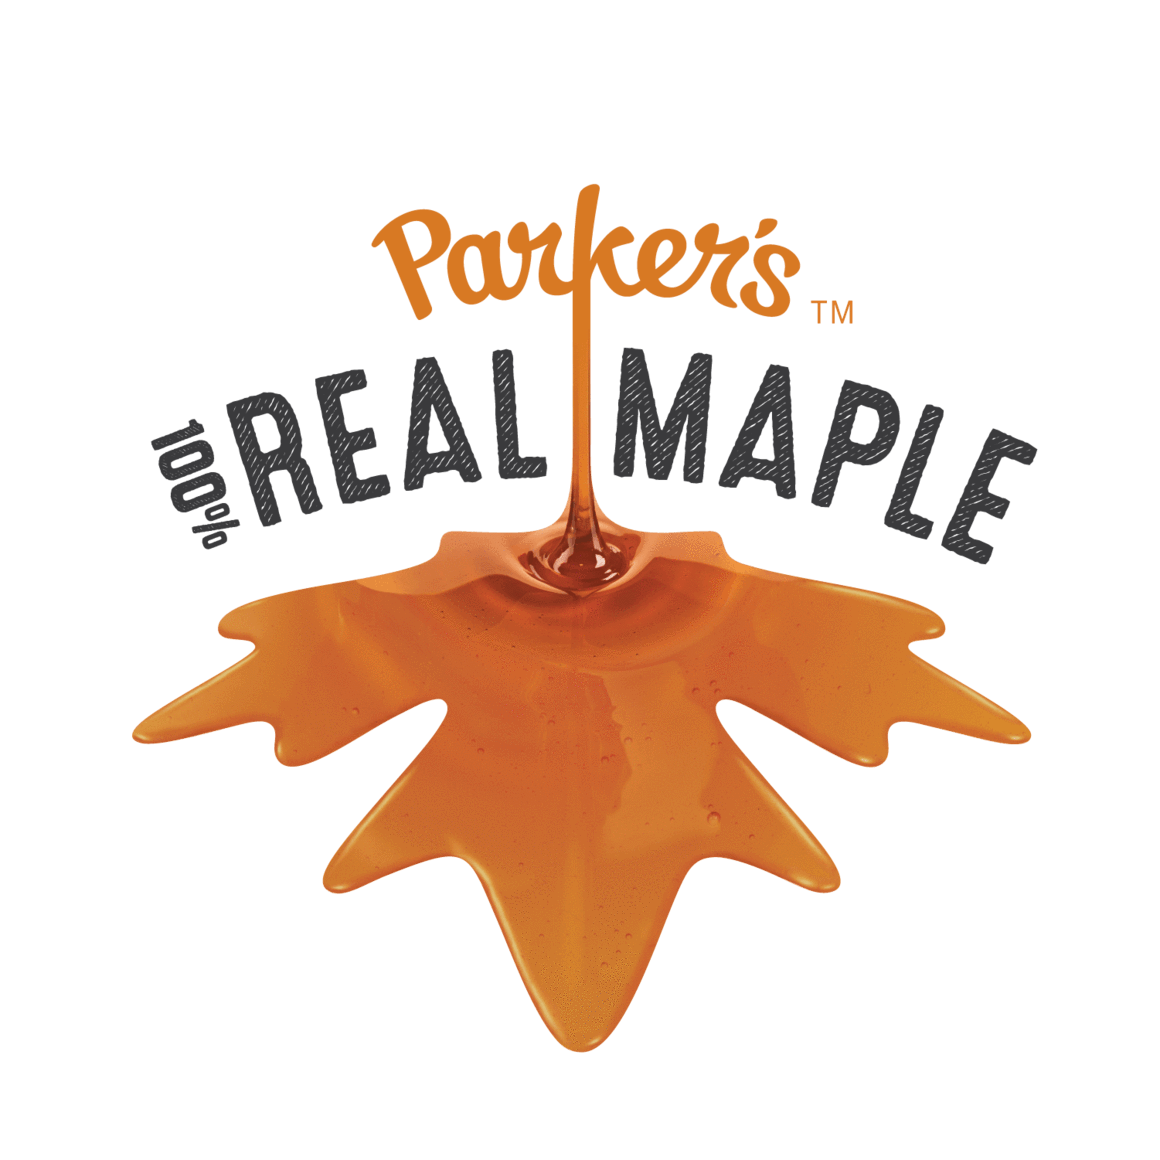 Maple Syrup Logo - 100% Real Maple Products - Parker's Real Maple™